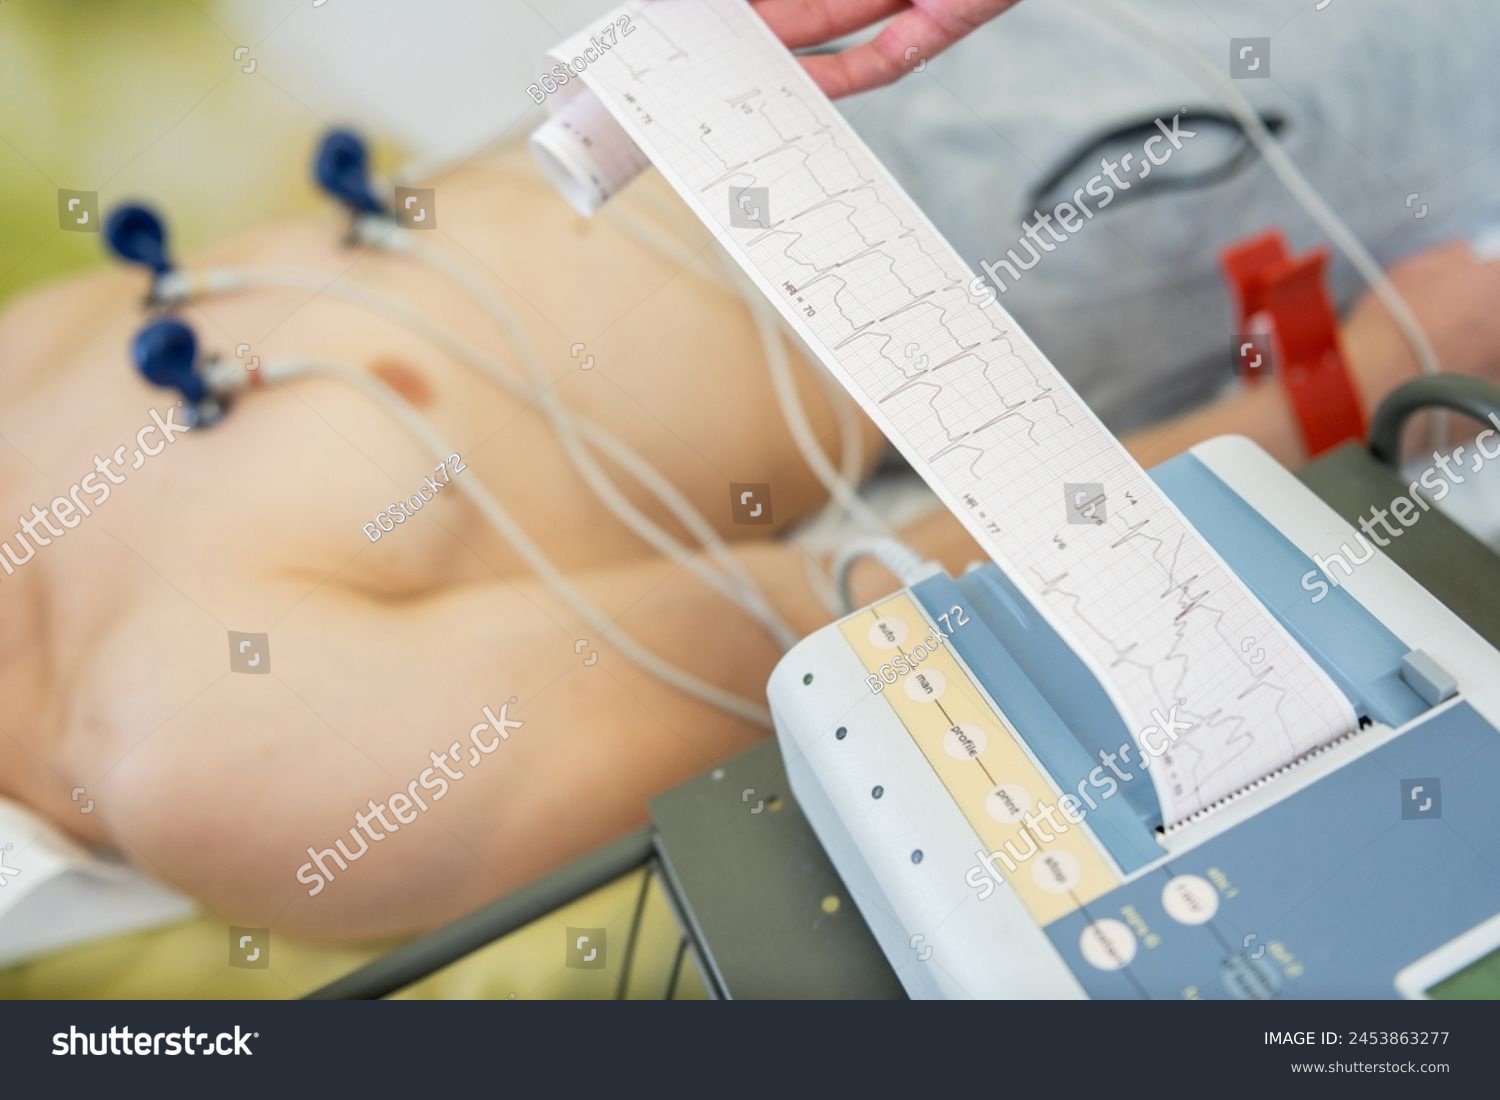 A patient undergoing an electrocardiogram test with electrodes attached to the chest, as a healthcare professional examines the ECG readout. #2453863277